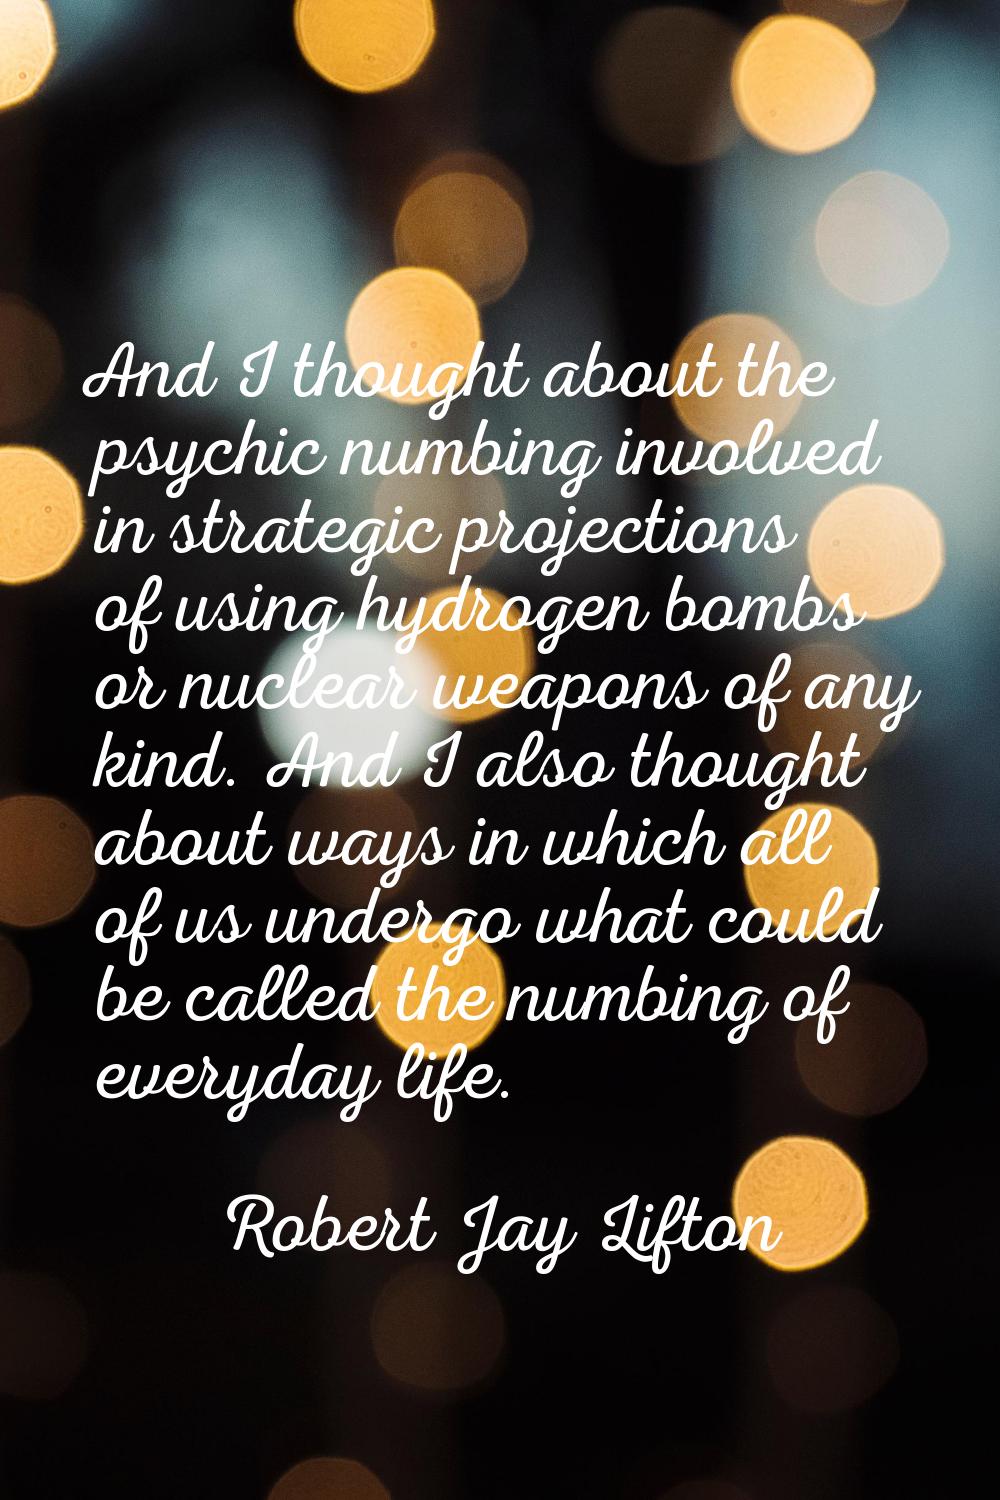 And I thought about the psychic numbing involved in strategic projections of using hydrogen bombs o